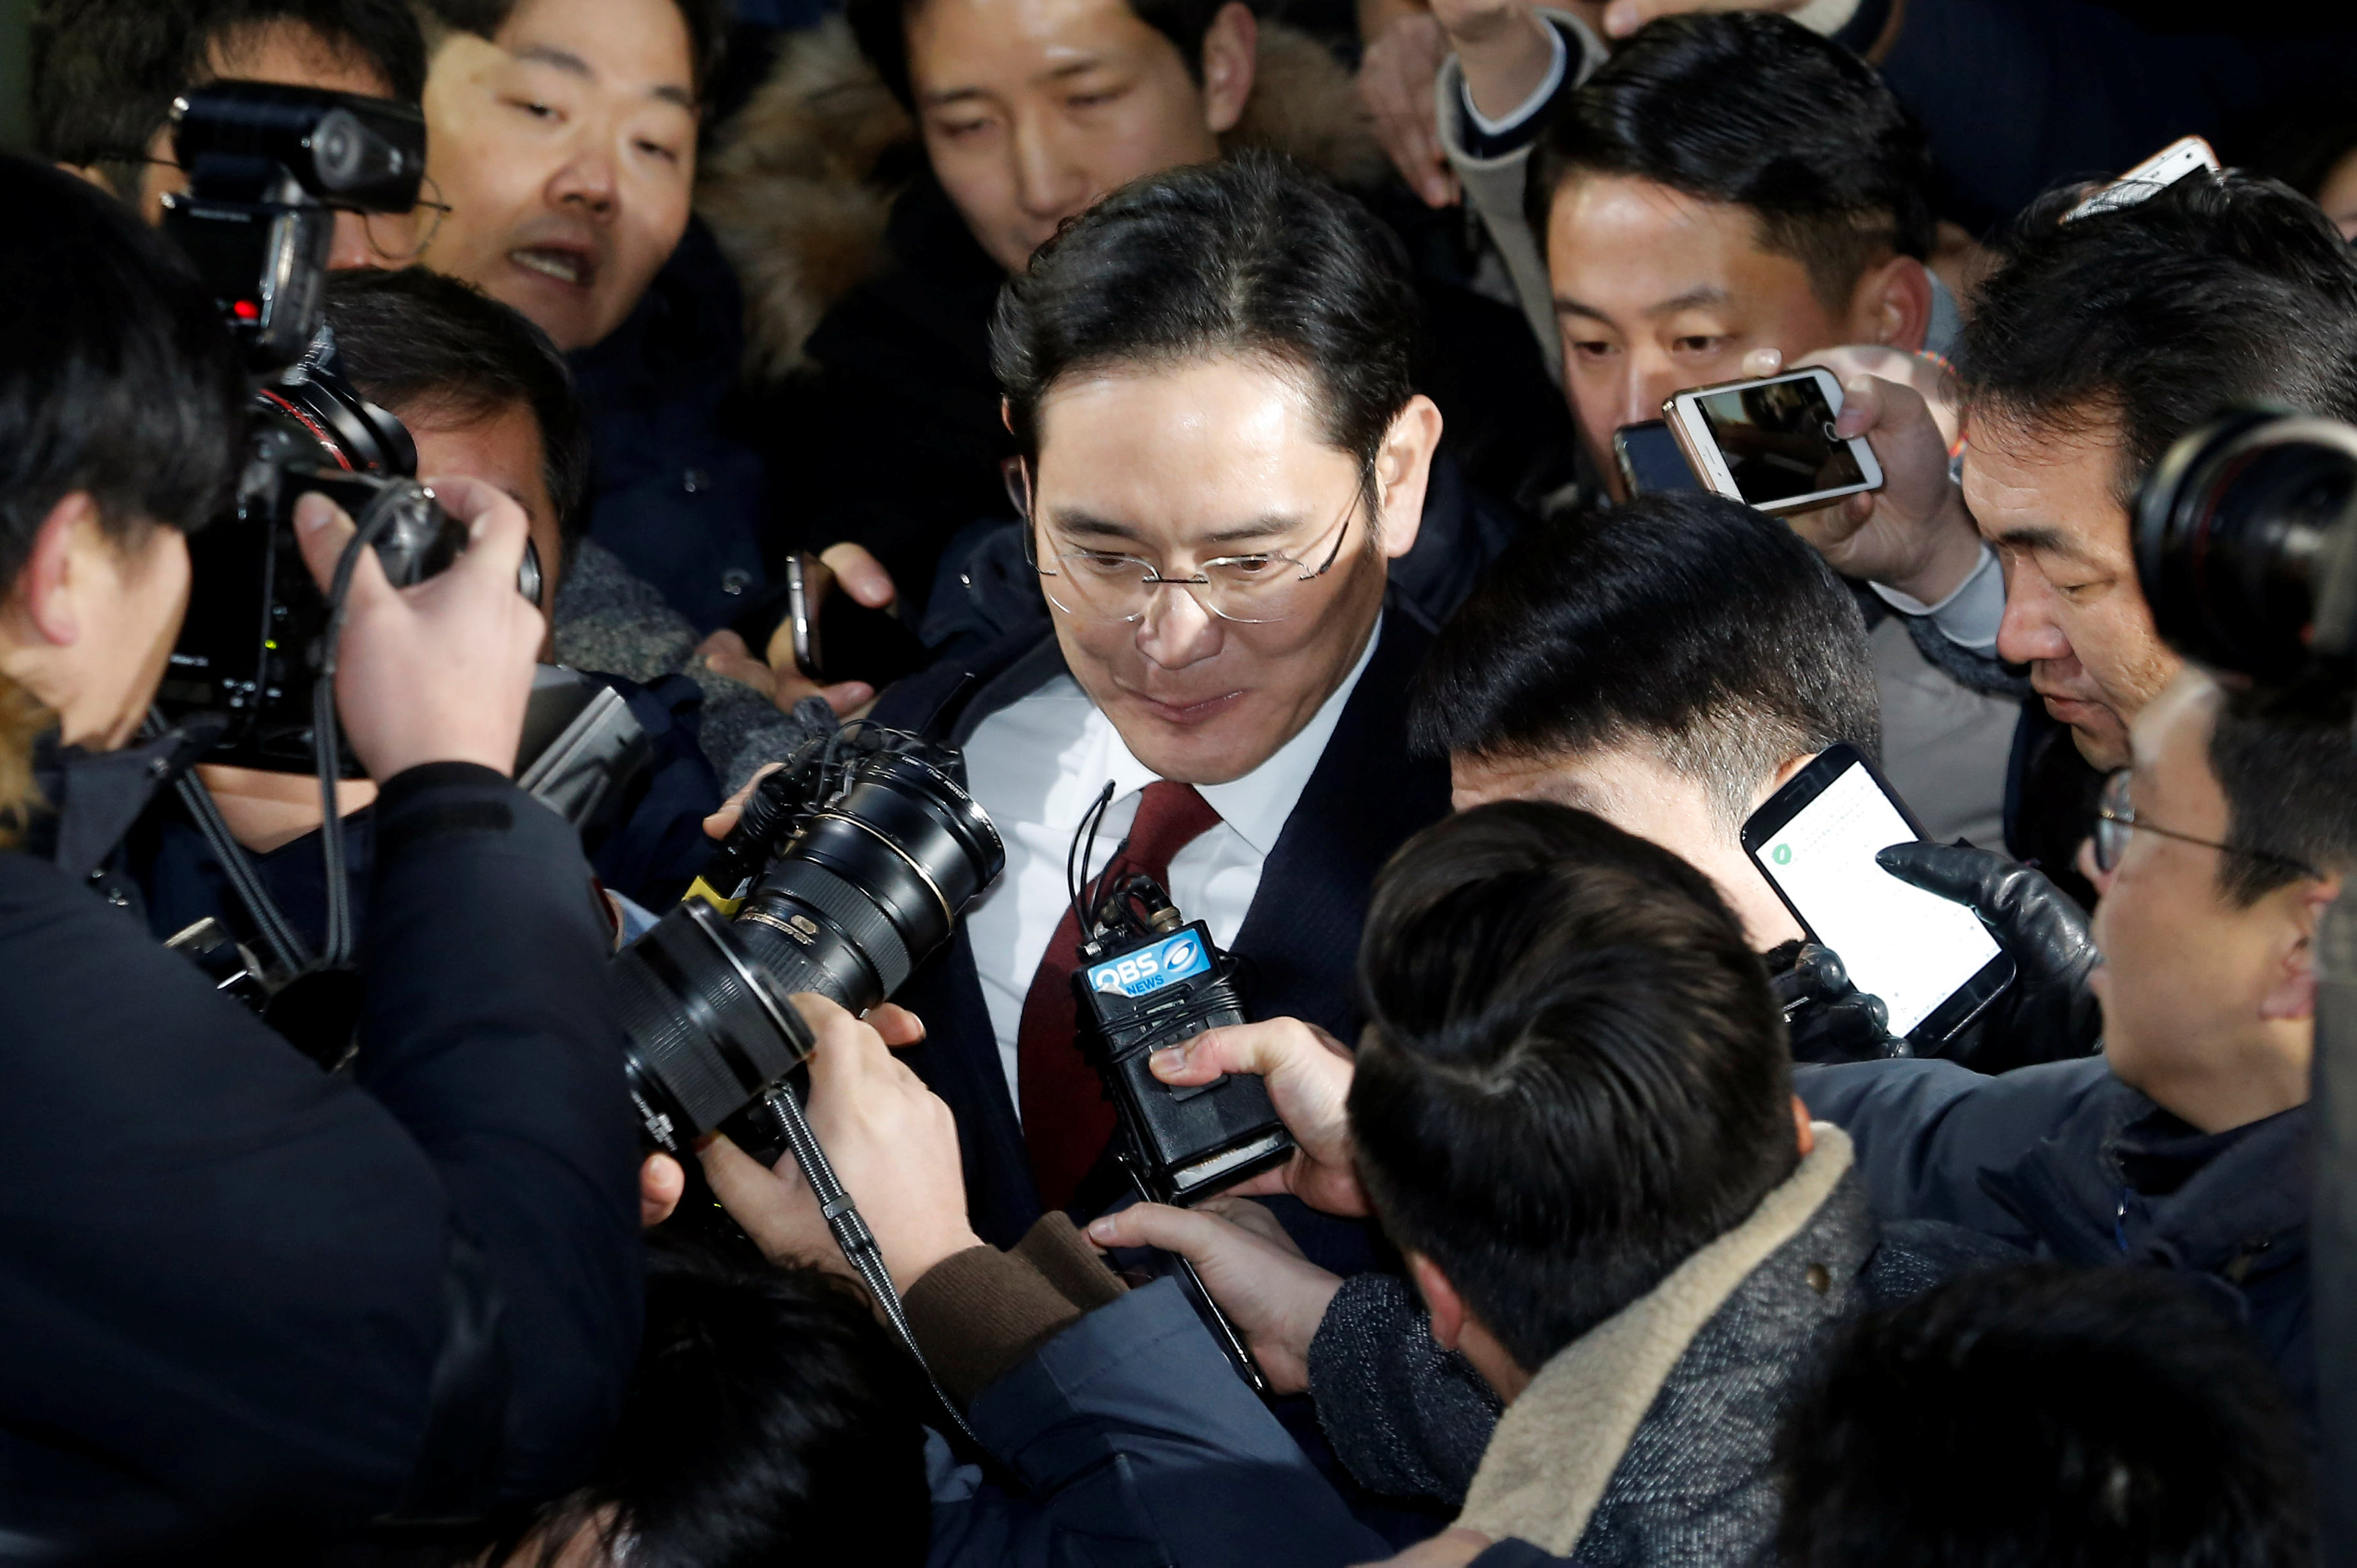 No sleep, a $5 meal: Samsung scion questioned for straight 22 hours